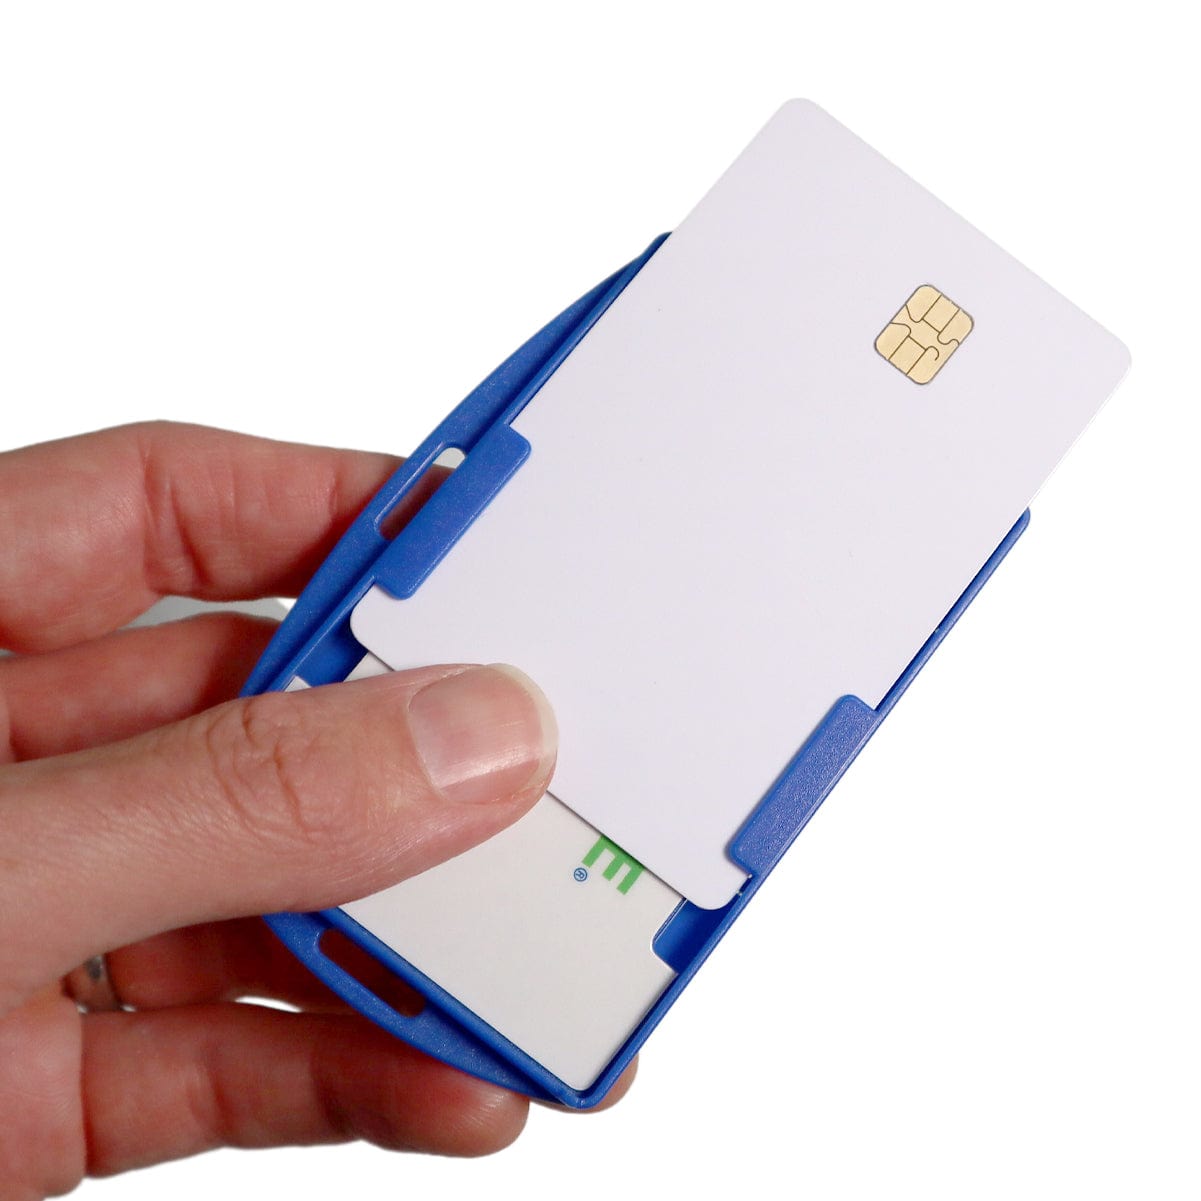 A hand holds a white smart card with a visible gold chip, which is partially inserted into a blue SkimSAFE FIPS 201 RFID Blocking 2-Card ID Holder (AH-210), acting as an ID holder with FIPS 201 compliance.